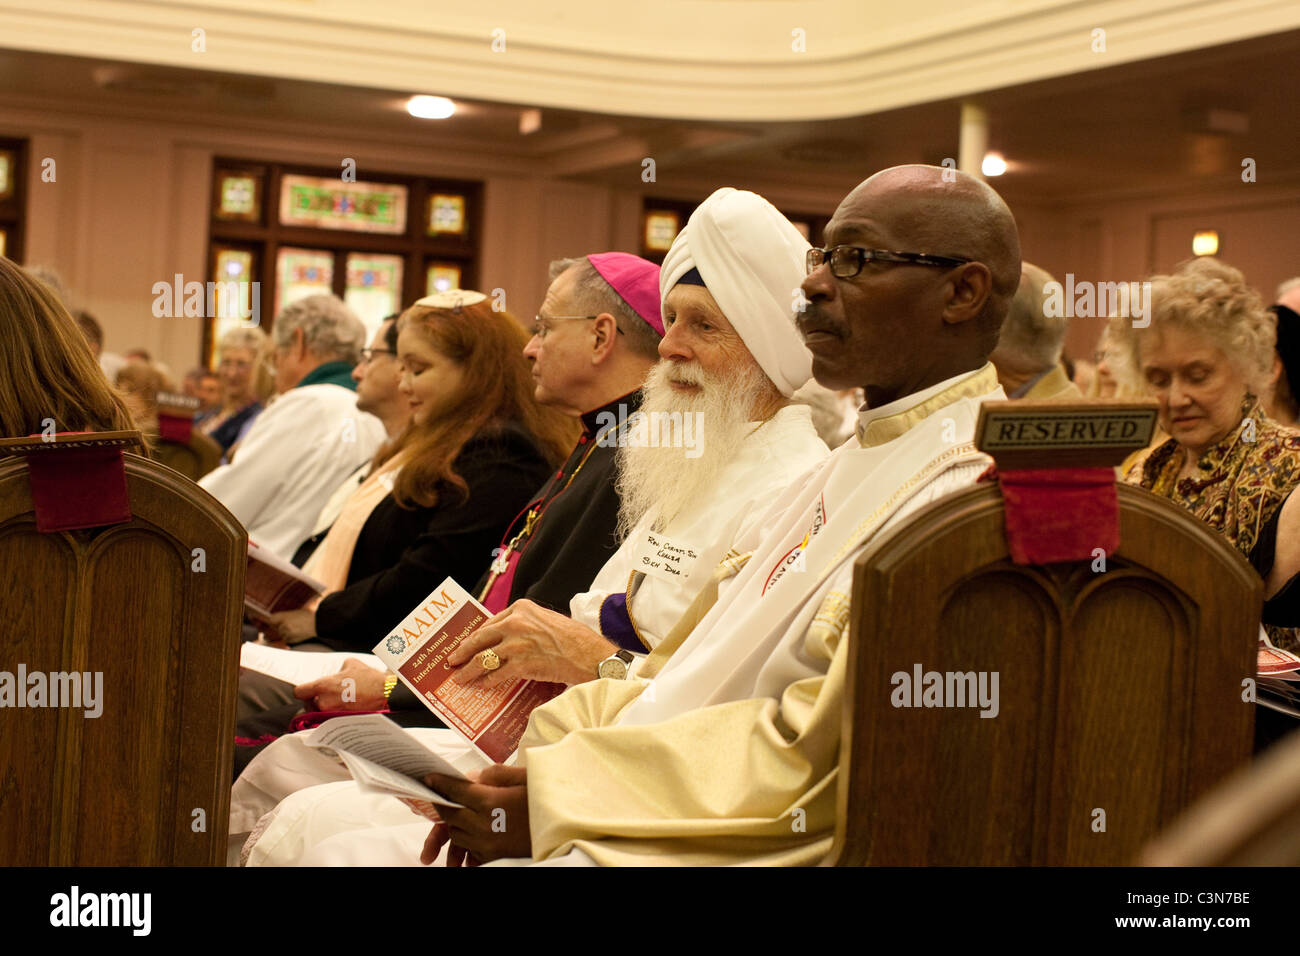 Religious leaders of various faiths and ethnic backgrounds and nationalities sit together in a pew at a Methodist church Stock Photo